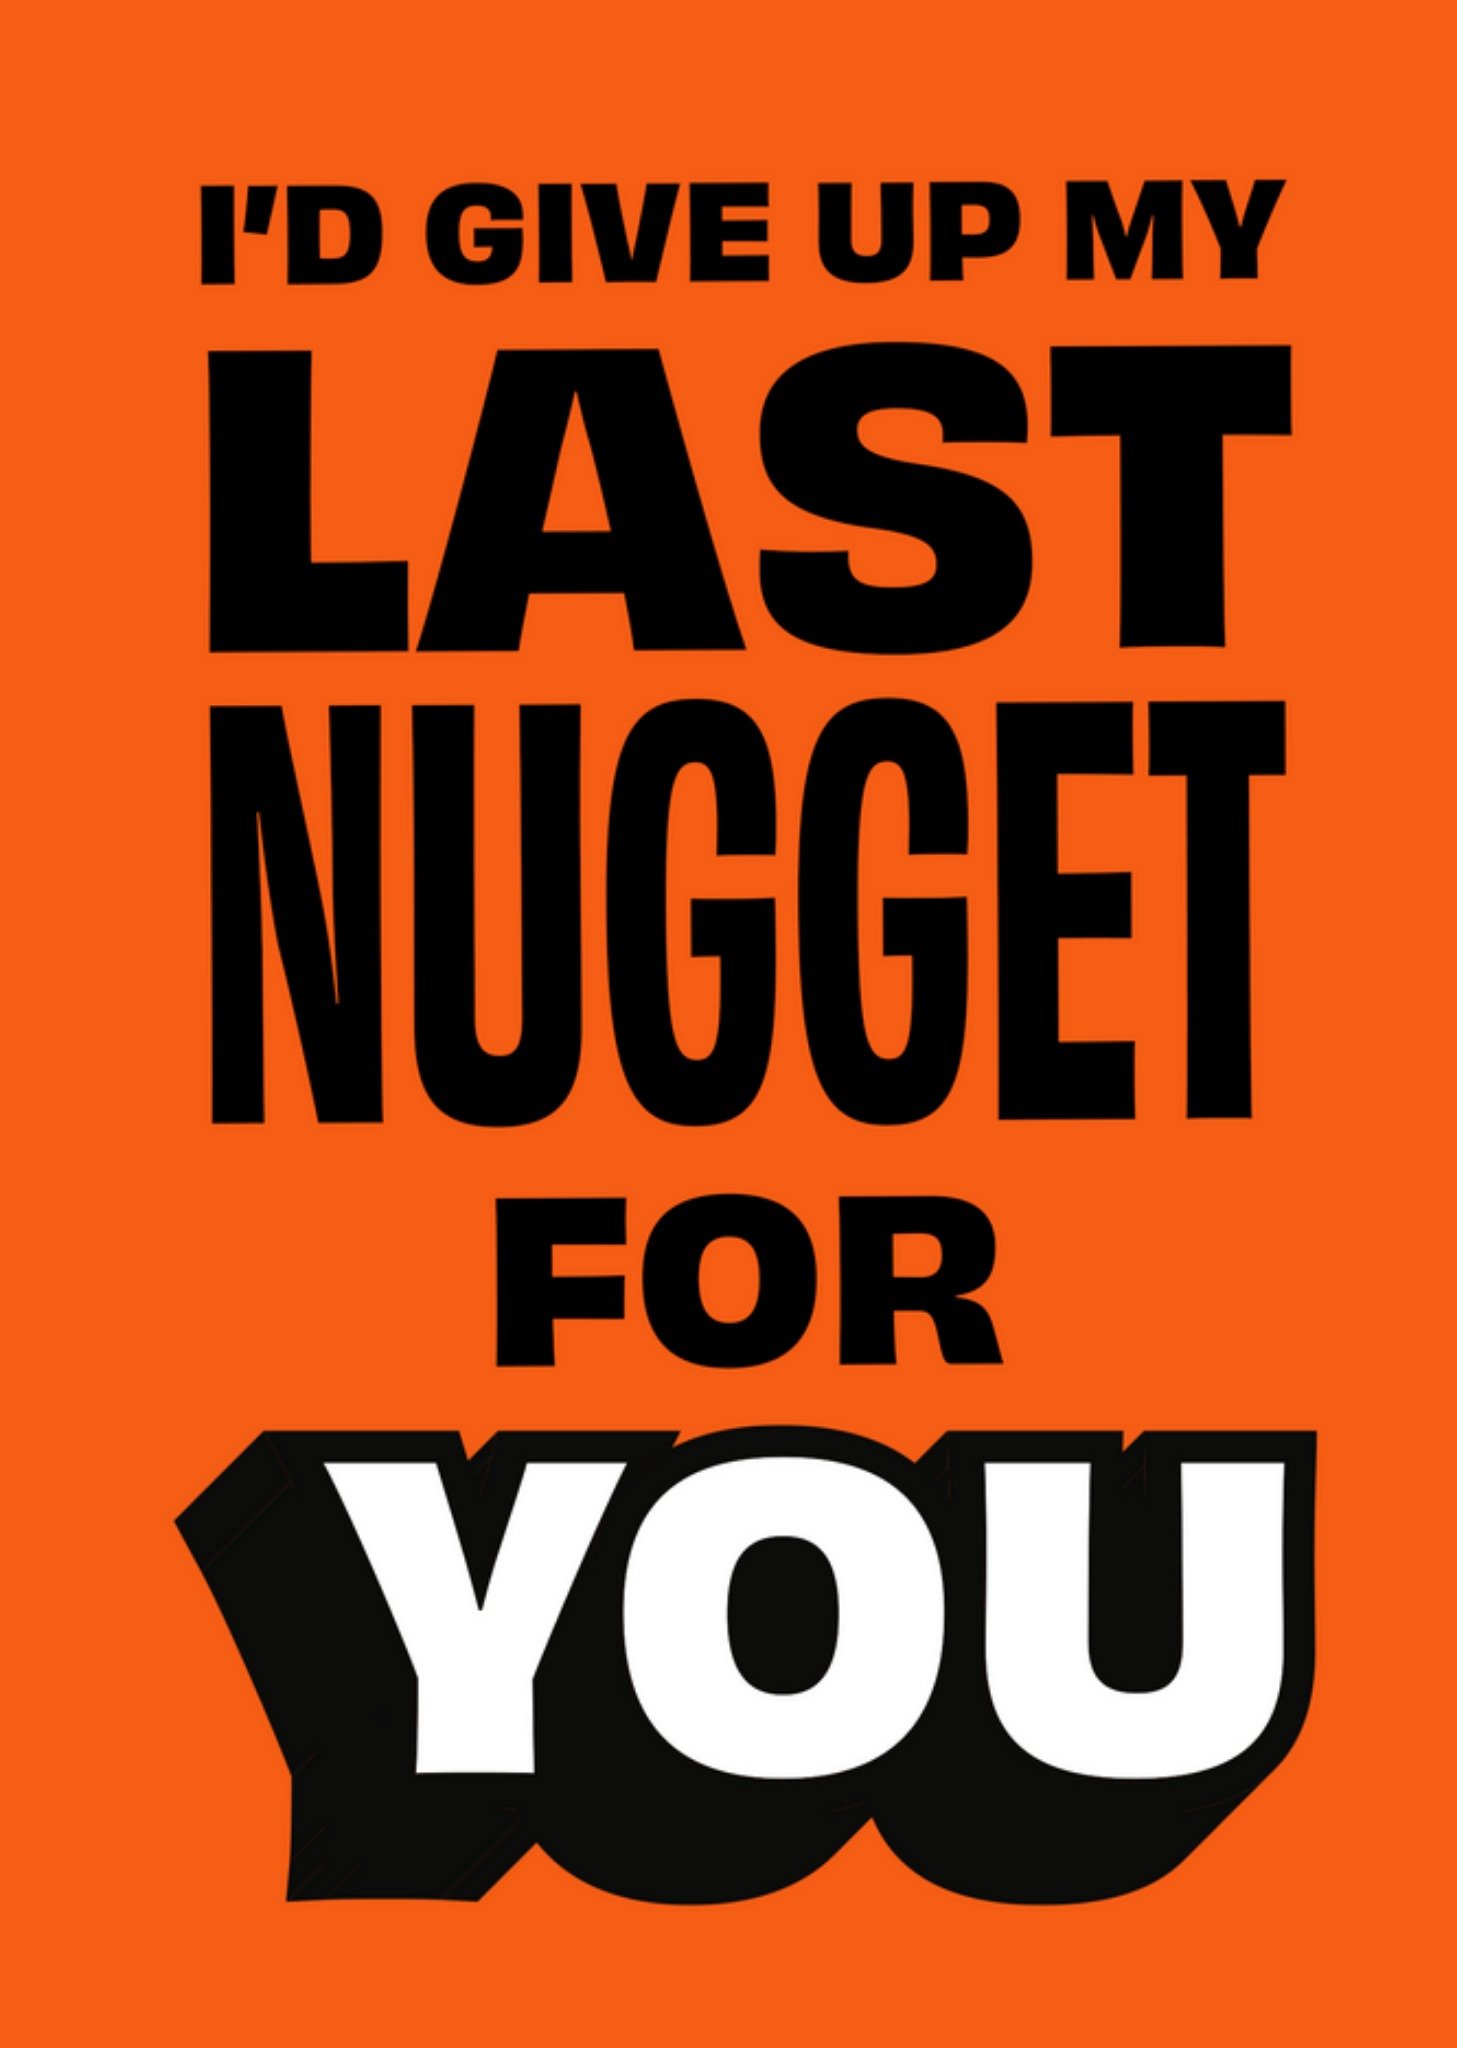 Moonpig Calm I'd Give Up My Last Nugget For You Funny Card, Large